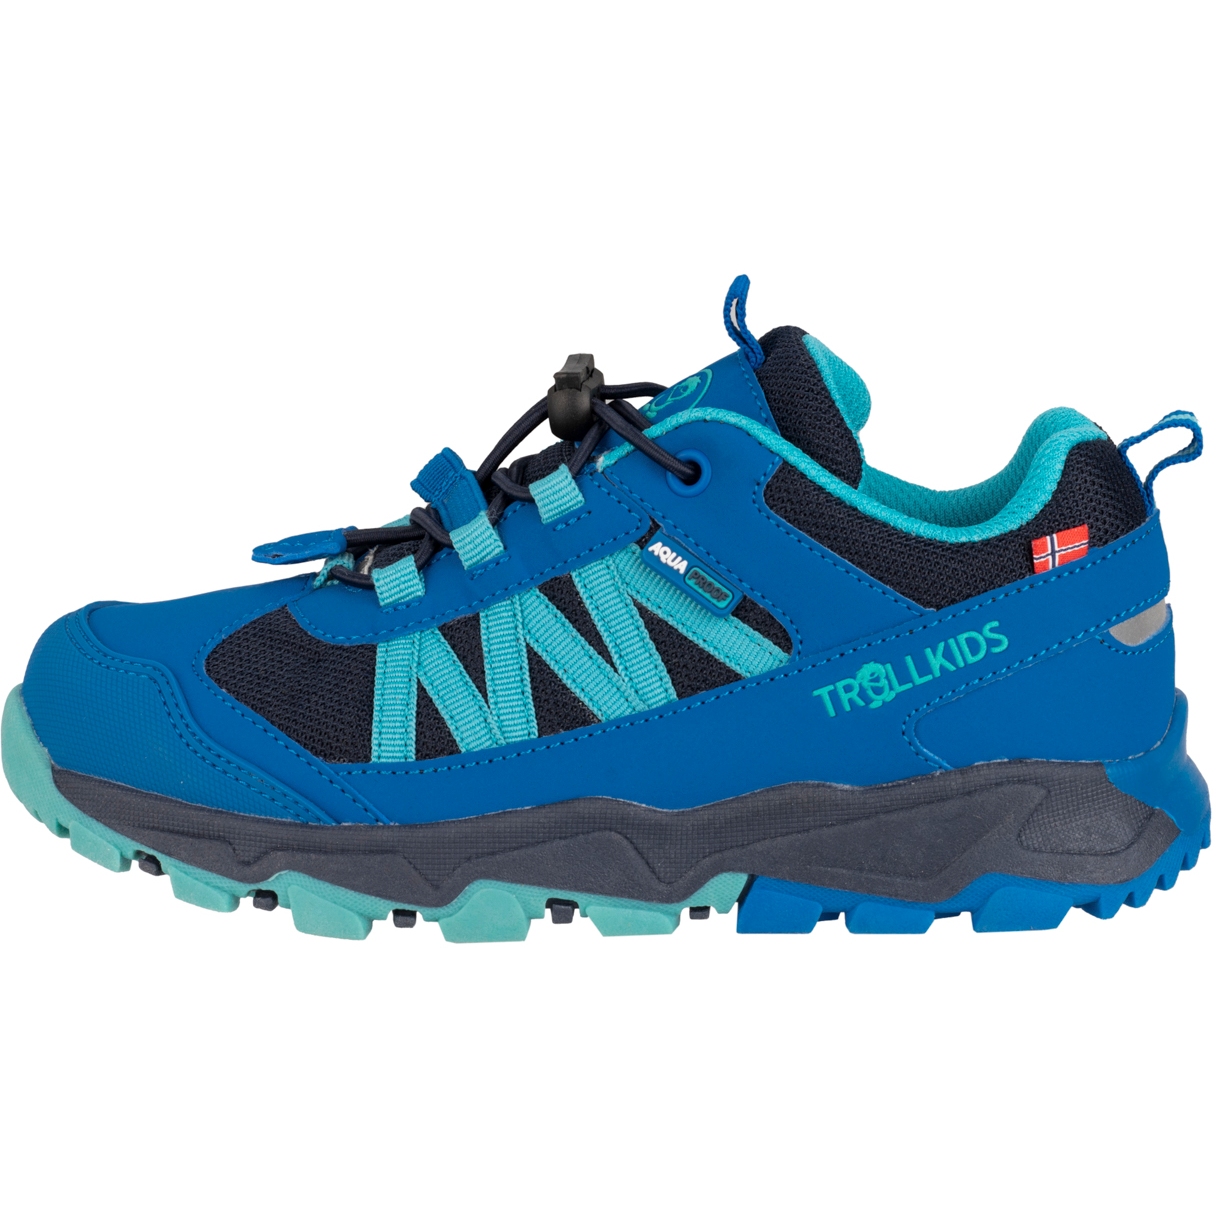 Picture of Trollkids Tronfjell Hiker Low Shoes Kids - cobalt blue/dusky turquoise/dark navy